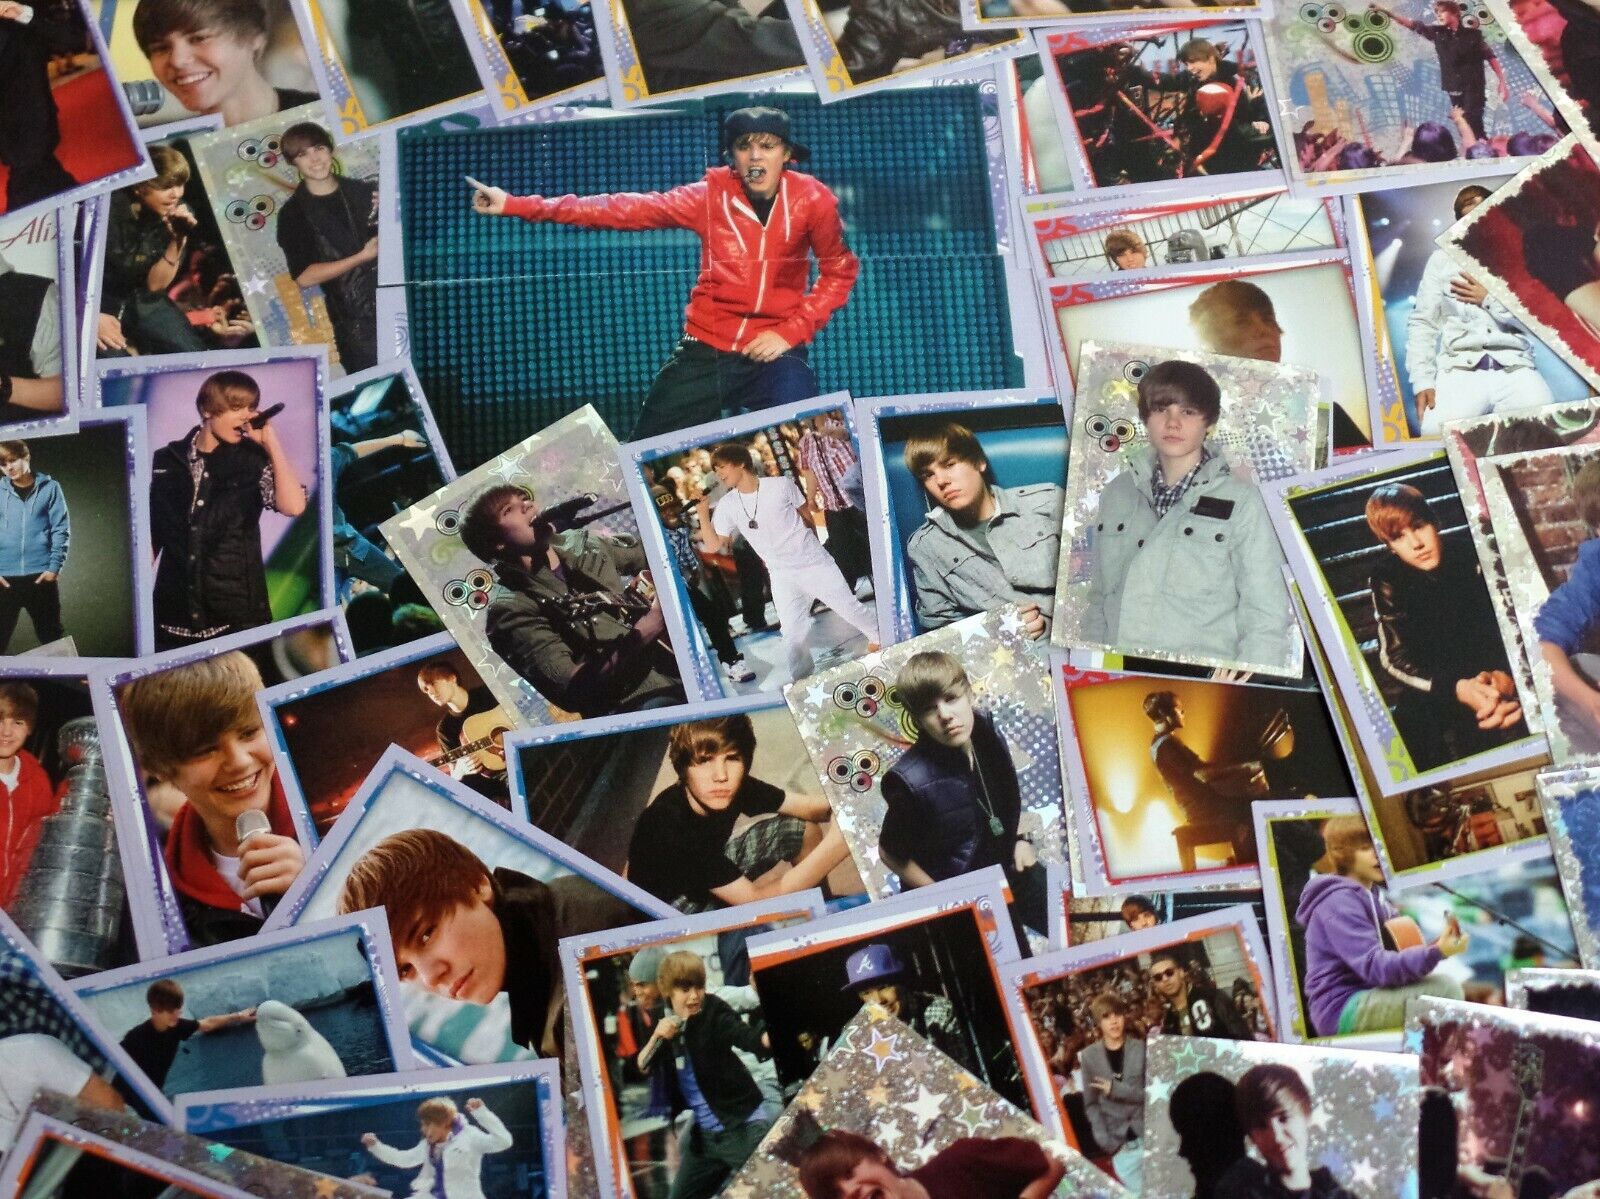 Justin Bieber 150 Special Cards Plus 30 Big Photocards Packs (4 photos each one)